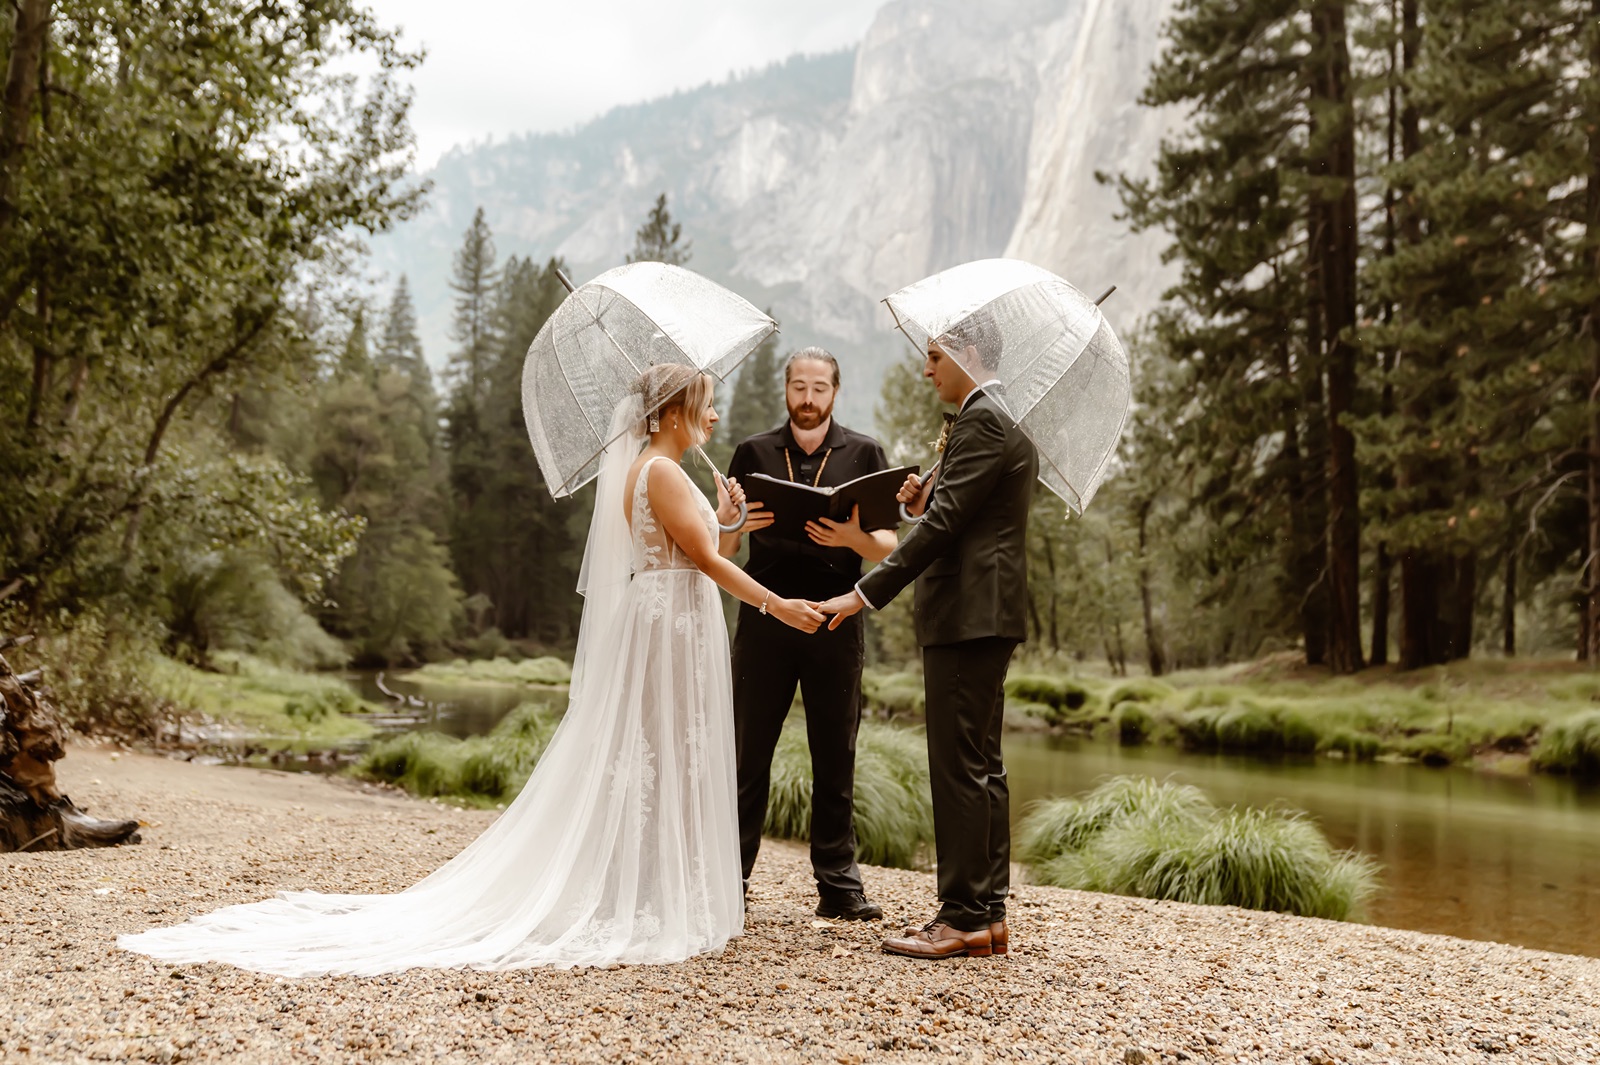 Bride and groom hold clear umbrellas during their Yosemite wedding ceremony